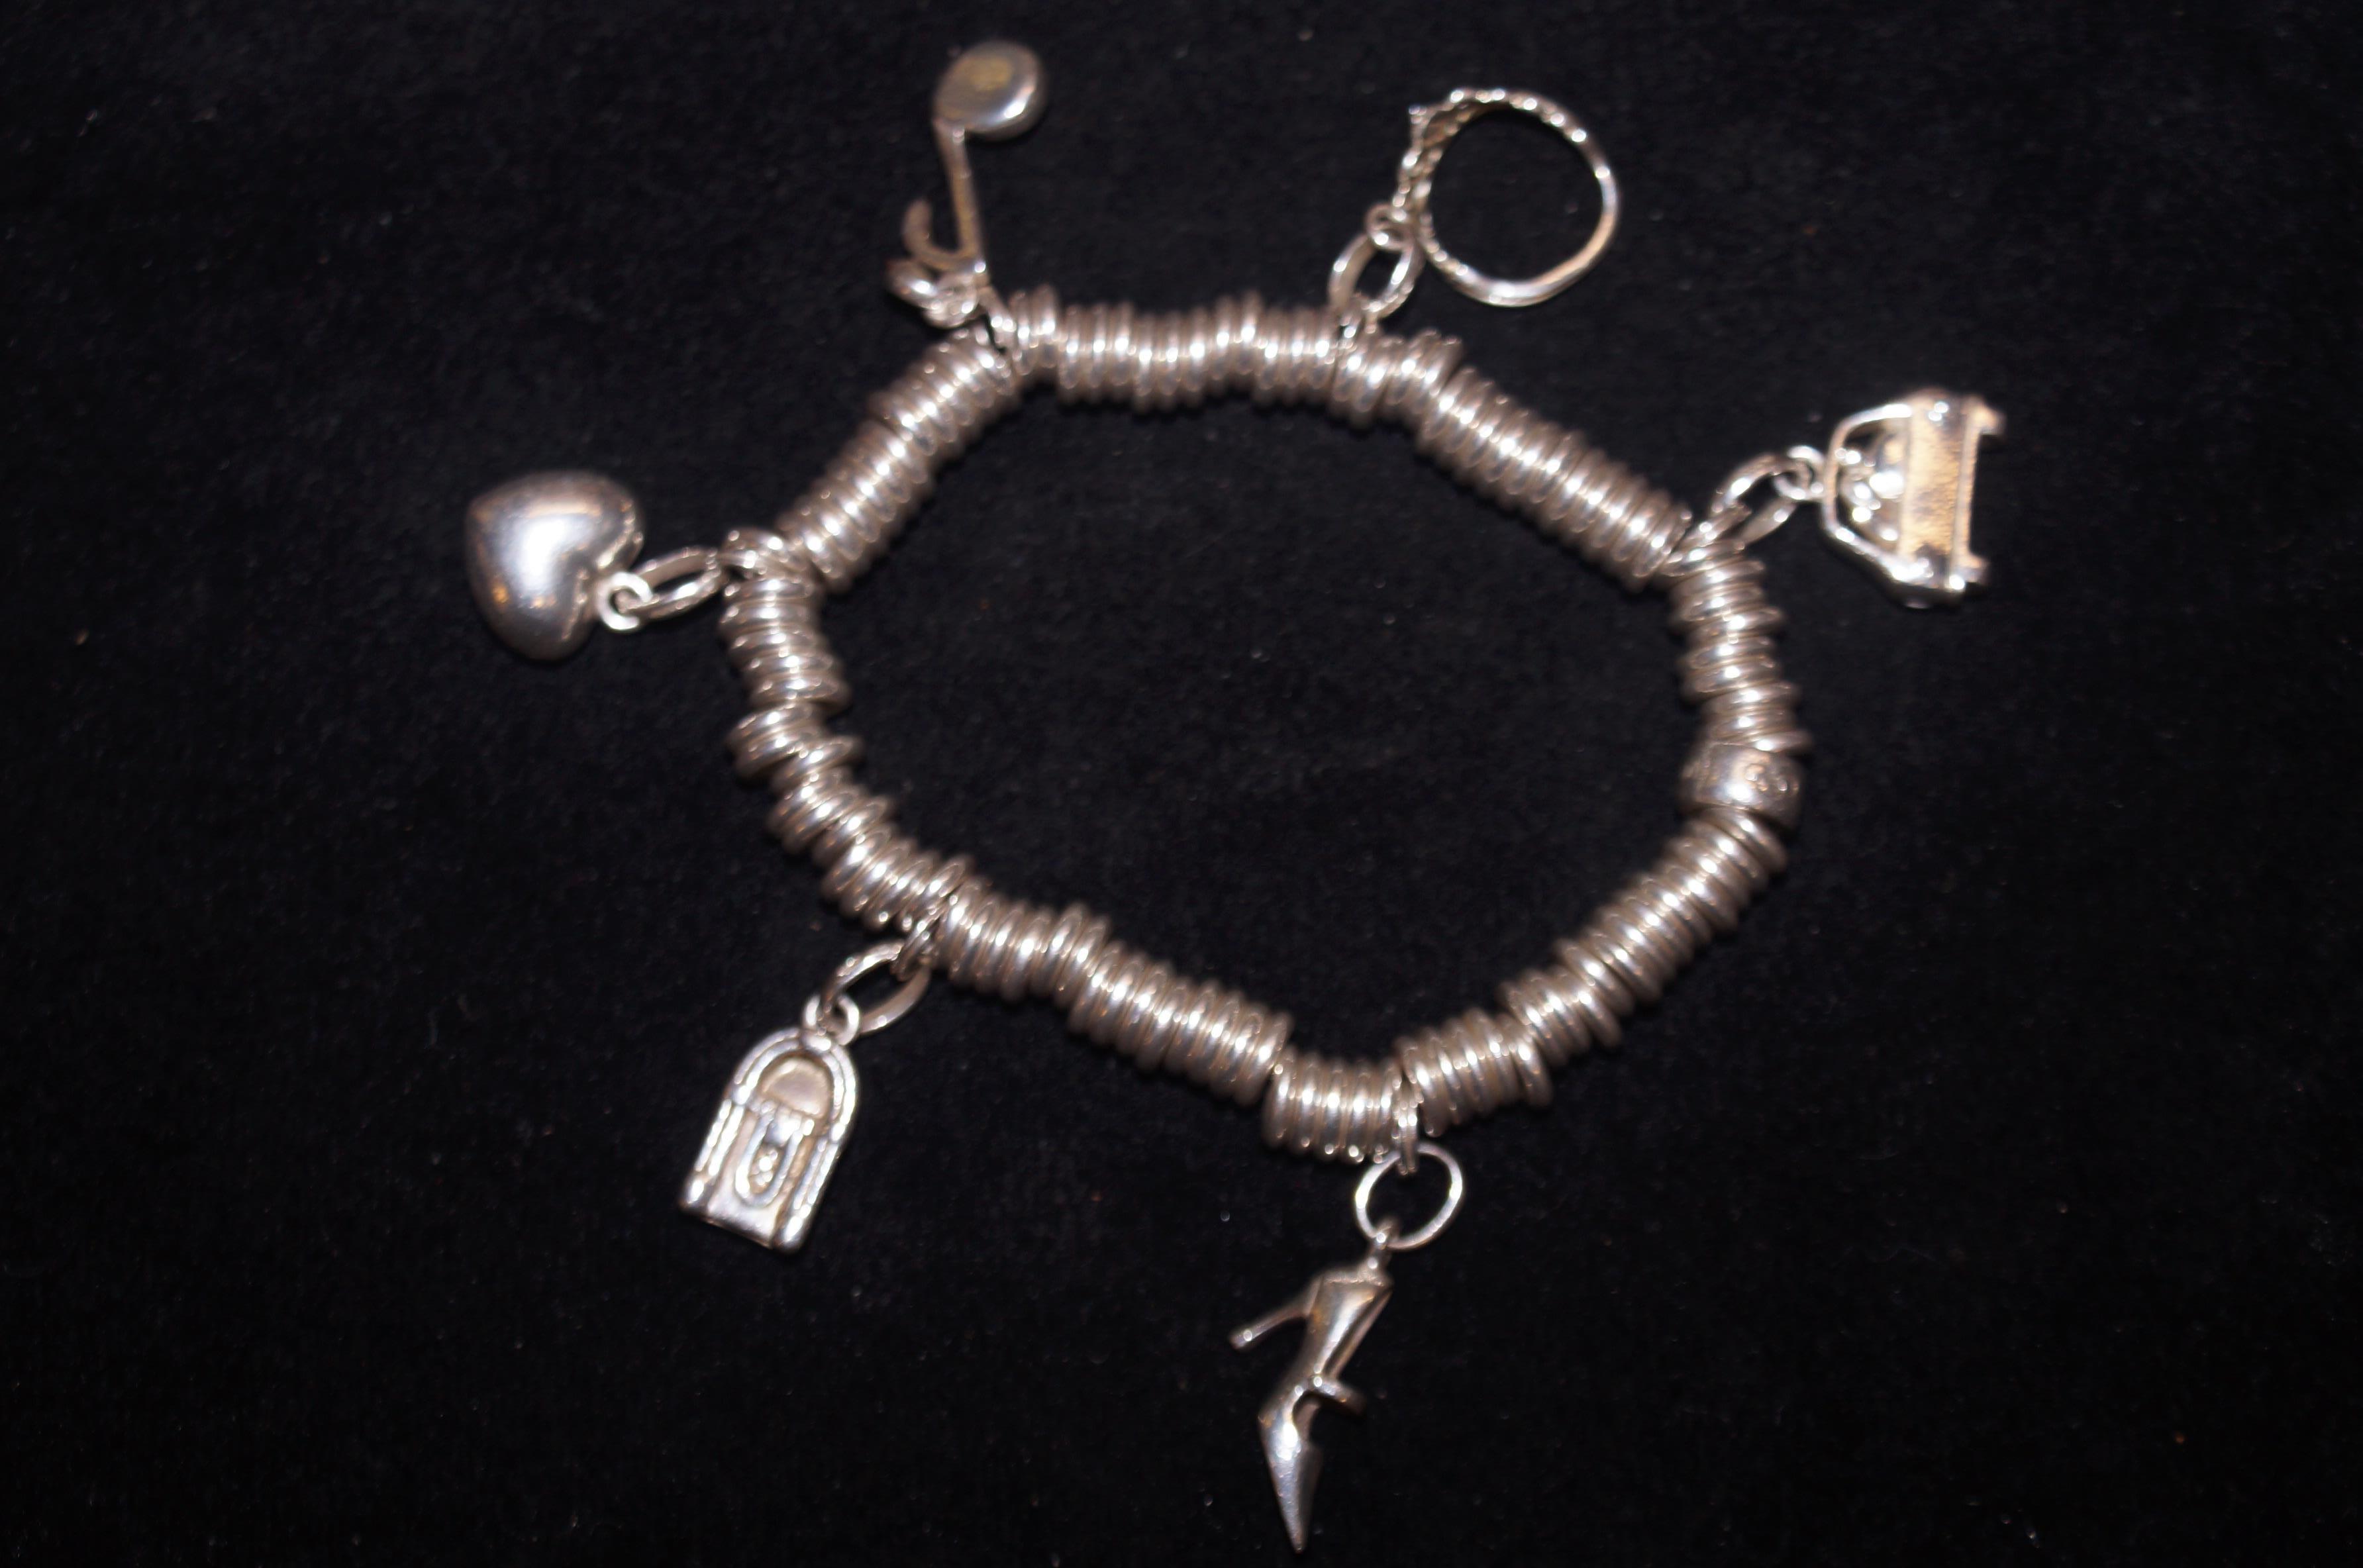 Silver Links of London Charm Bracelet with 6 Charm